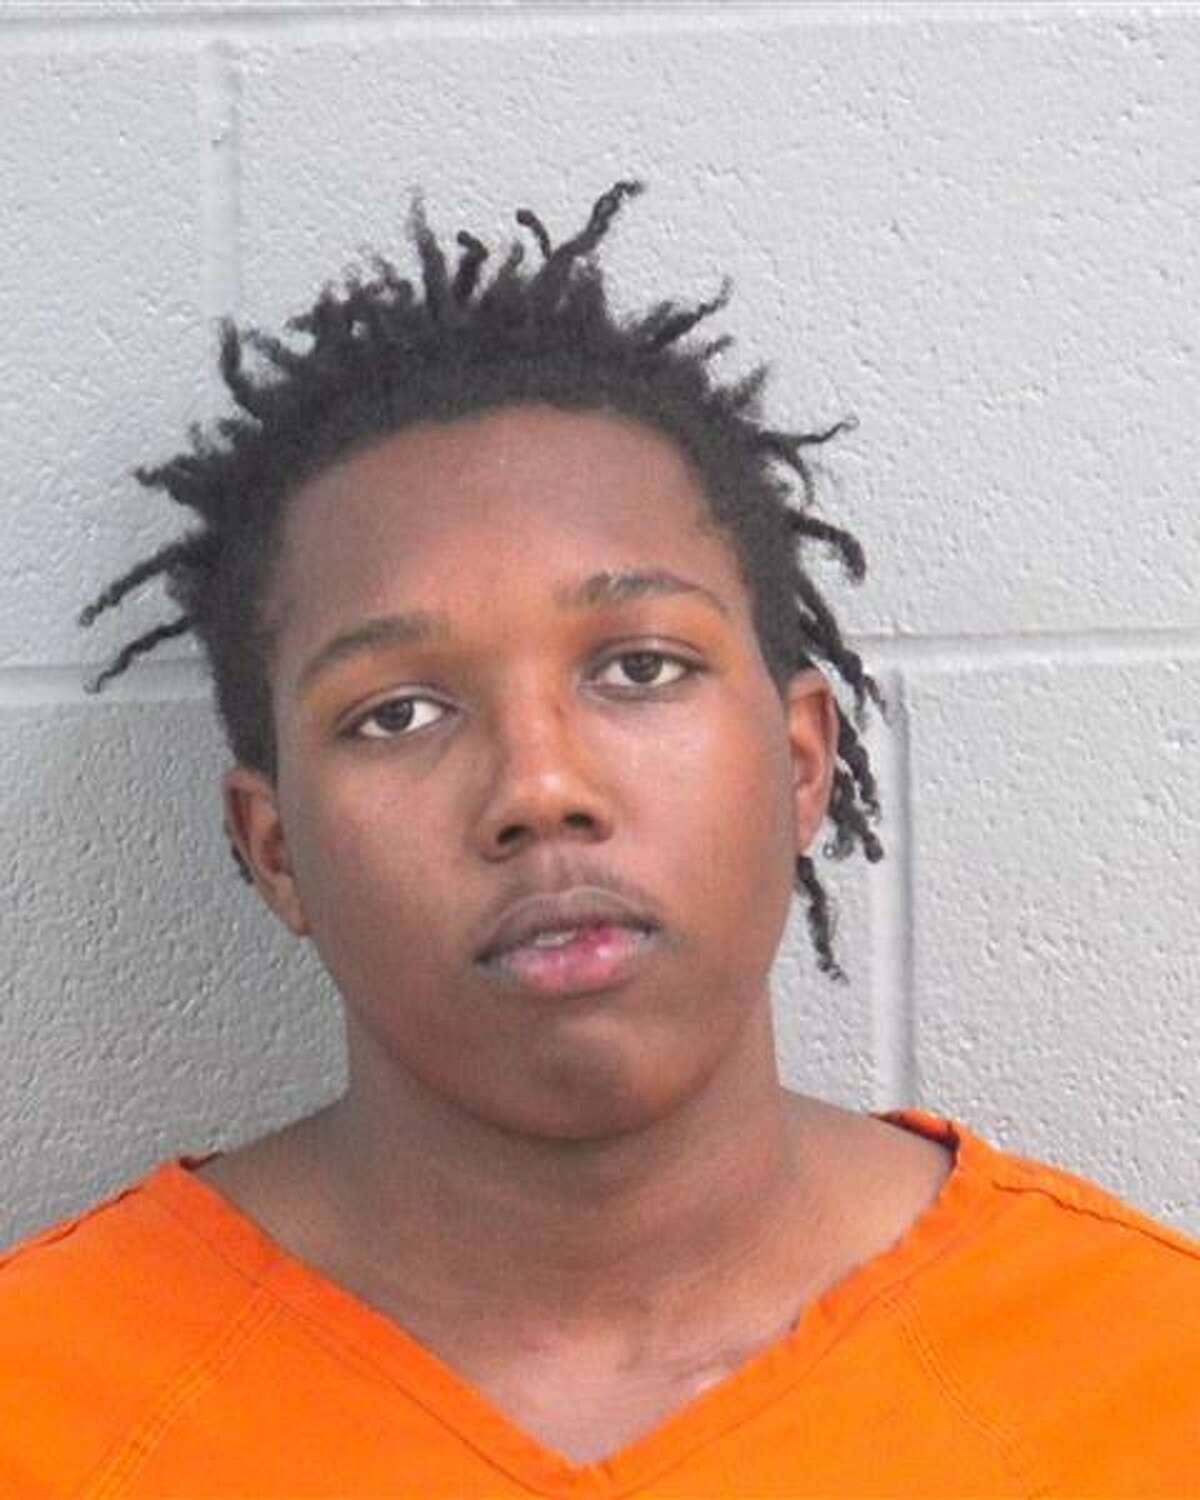 Malachi Mitchell, a Legacy High School student, was arrested on April 26 for assault of a public servant, according to court documents. 